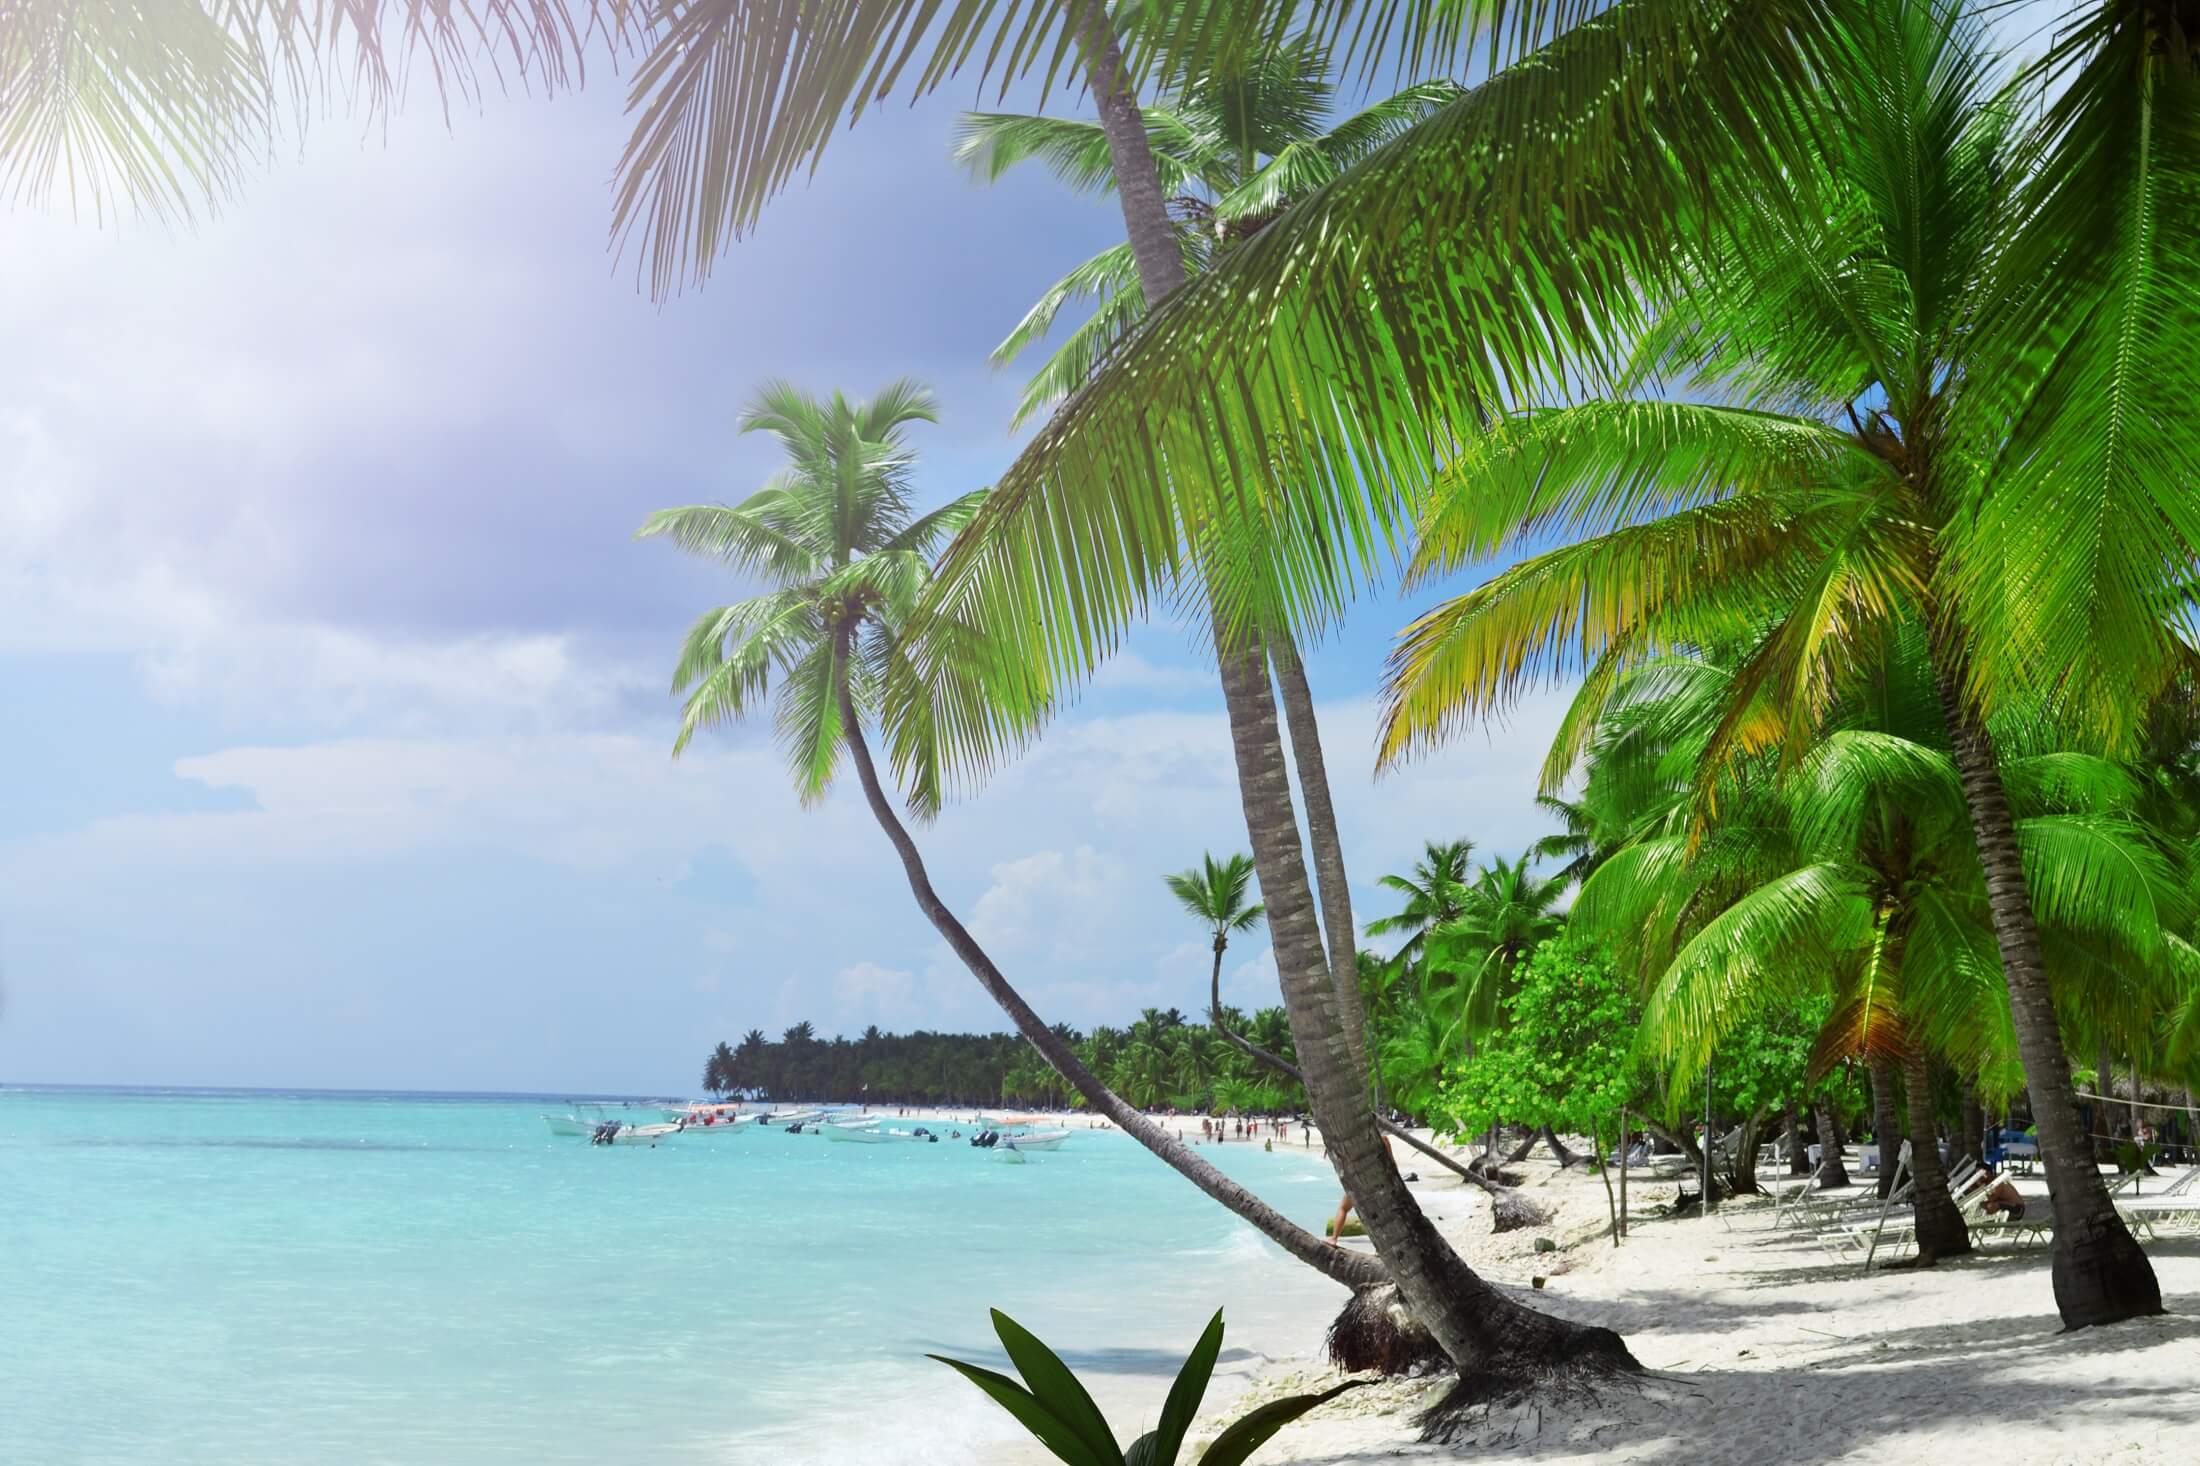 Tropical beach, turquoise sea, white sand and palm trees